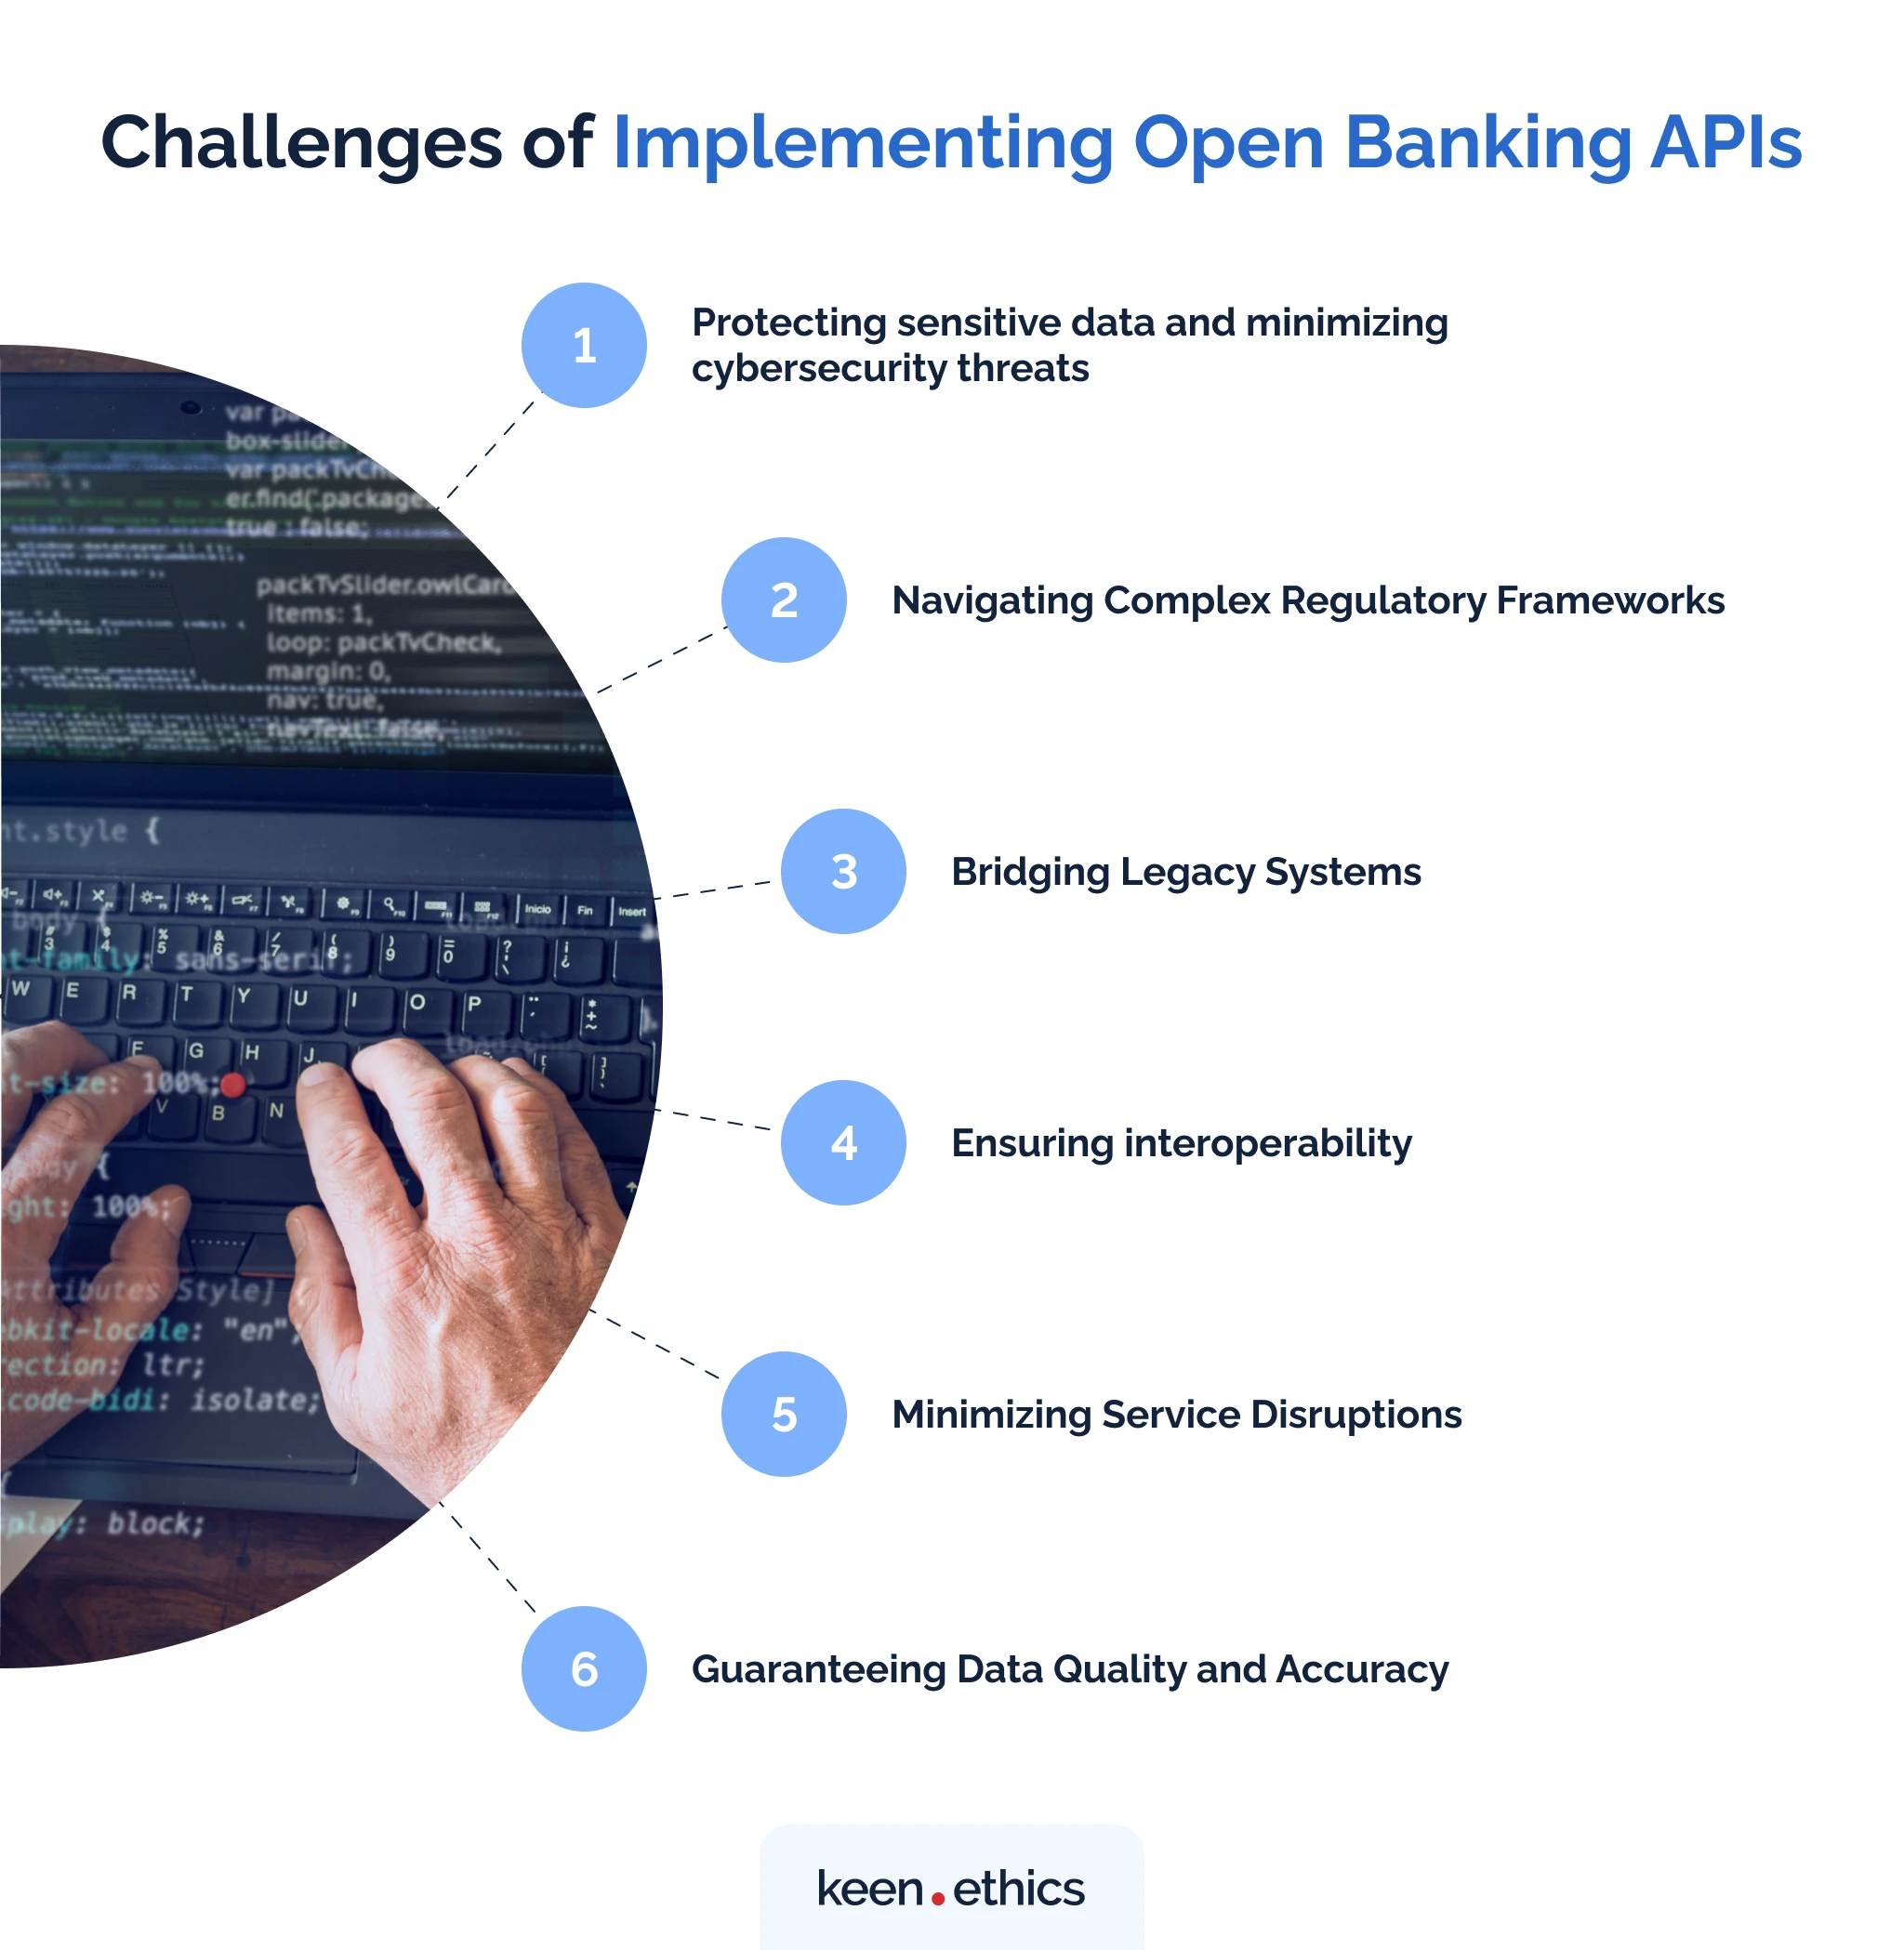 Challenges of implementing open banking APIs